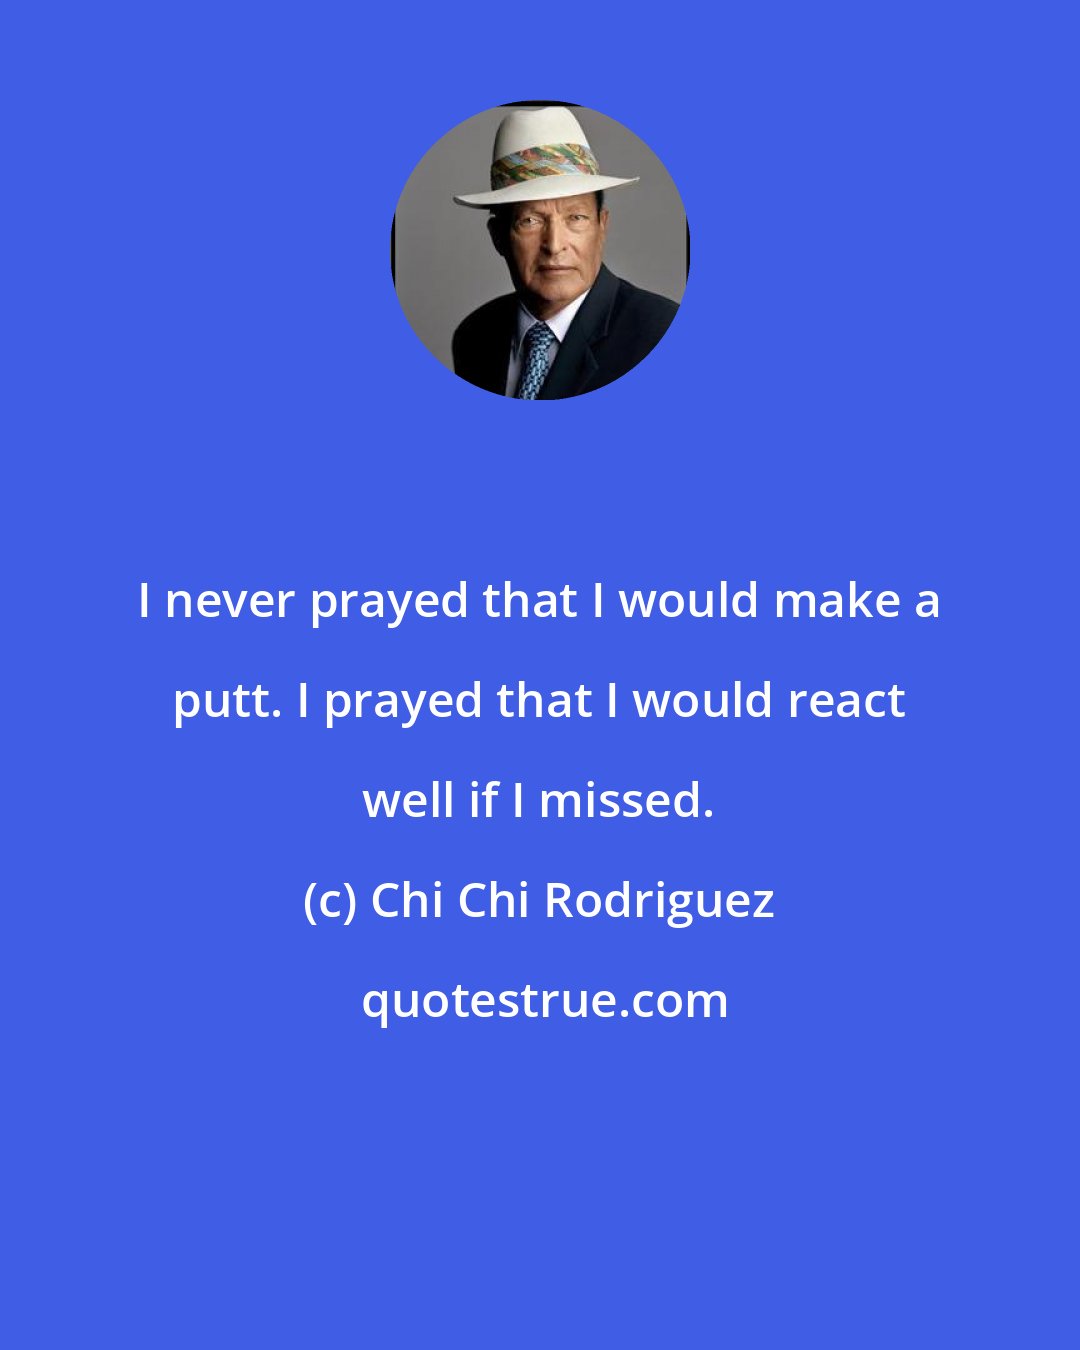 Chi Chi Rodriguez: I never prayed that I would make a putt. I prayed that I would react well if I missed.